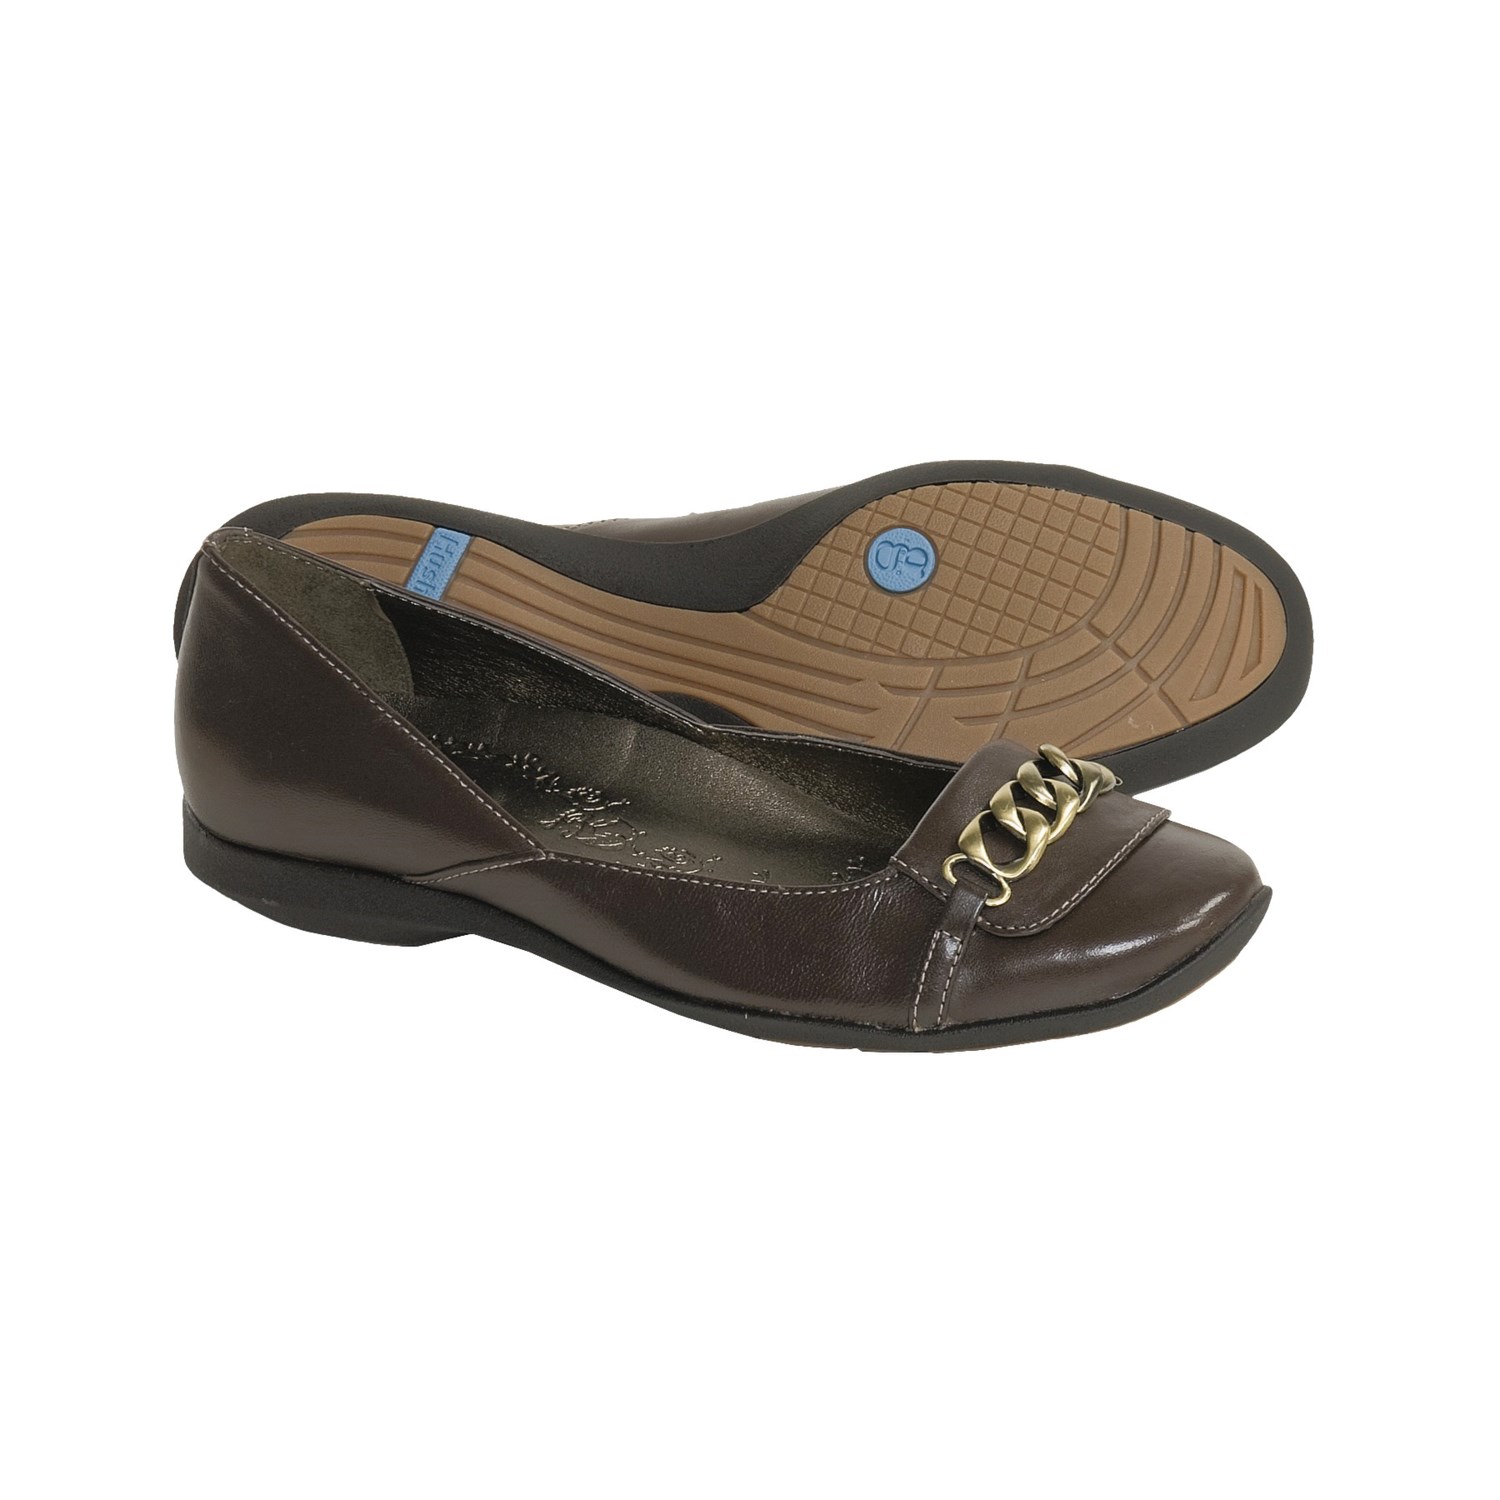 Hush Puppies Parley Leather Shoes (For Women) in Dark Brown